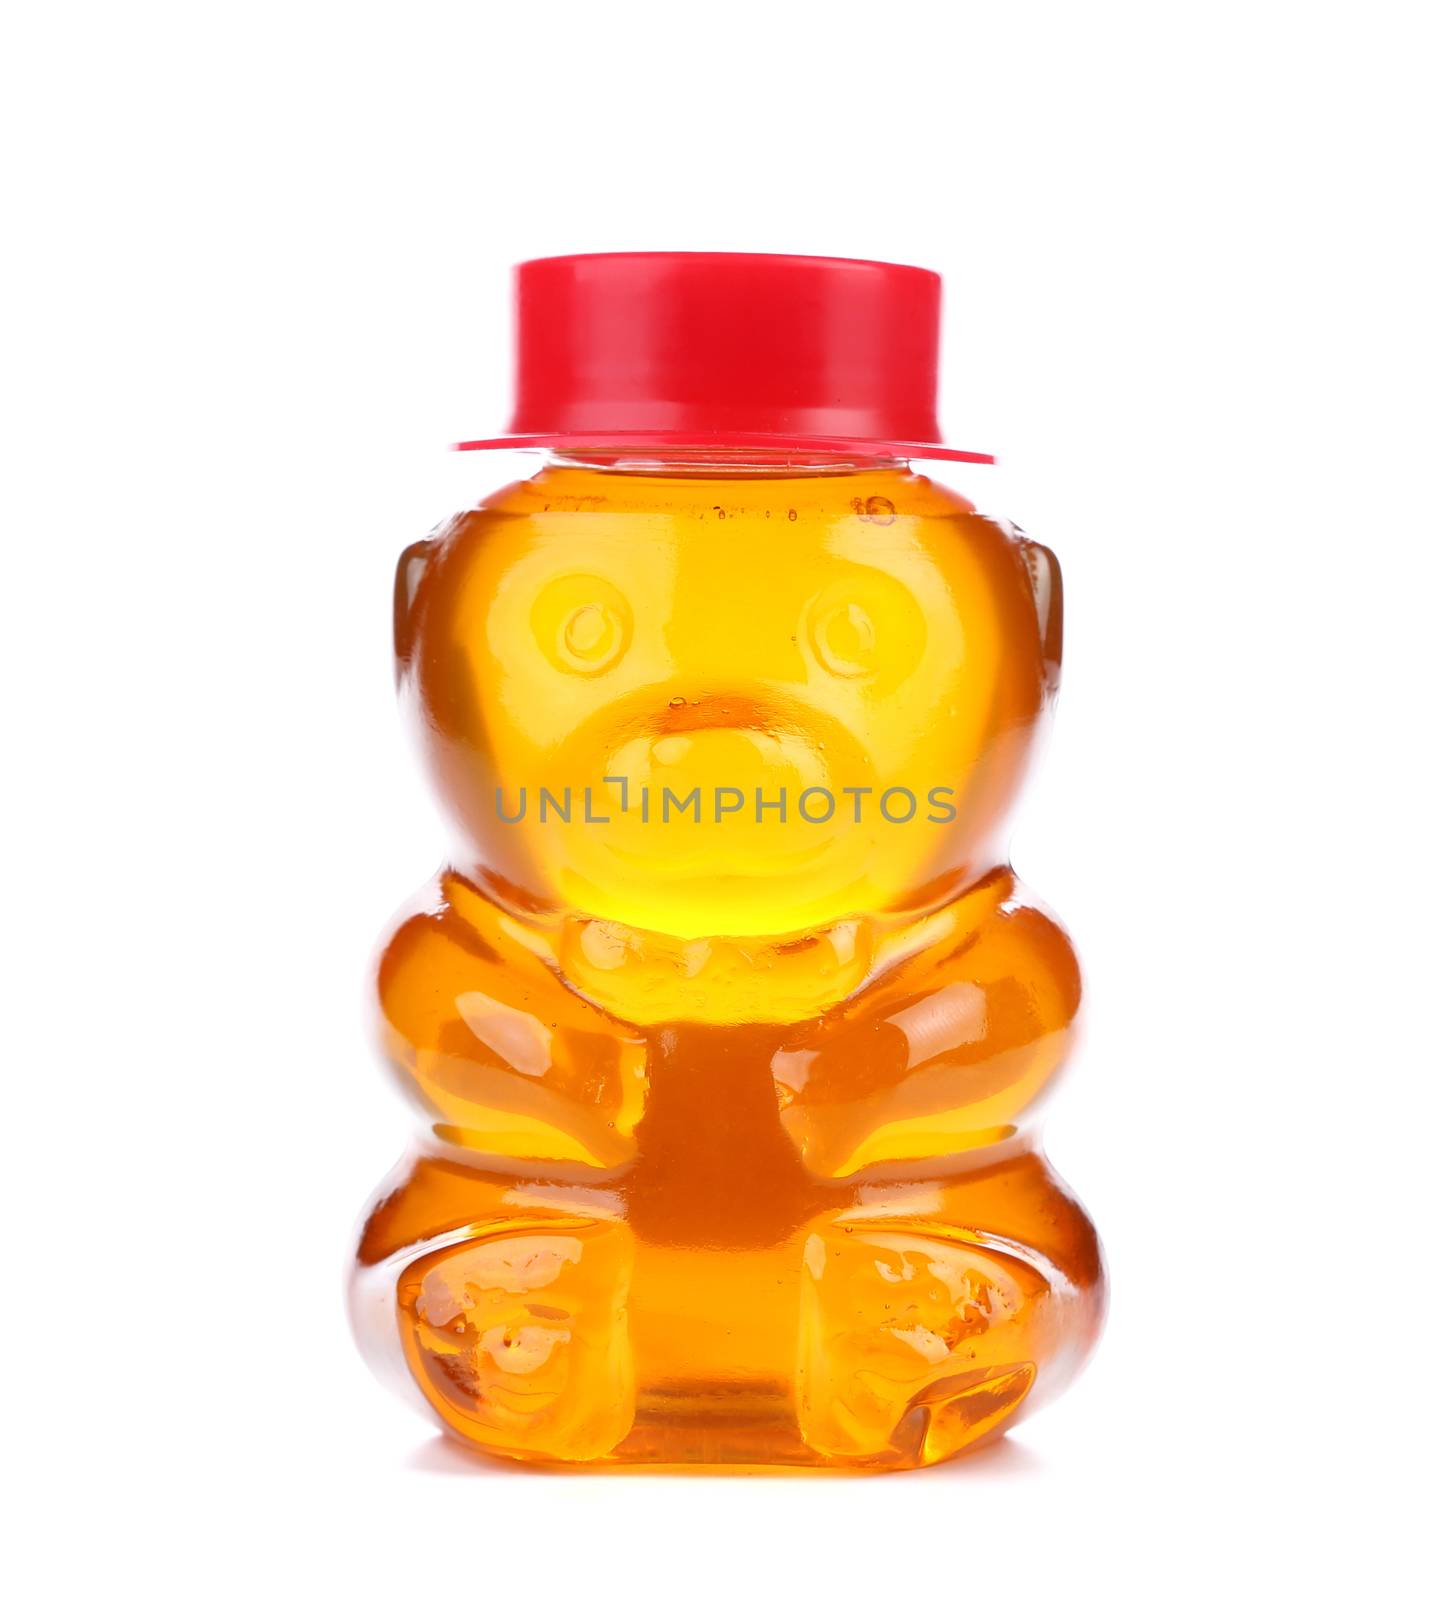 Bottle shaped like a bear and filled with honey. White background.